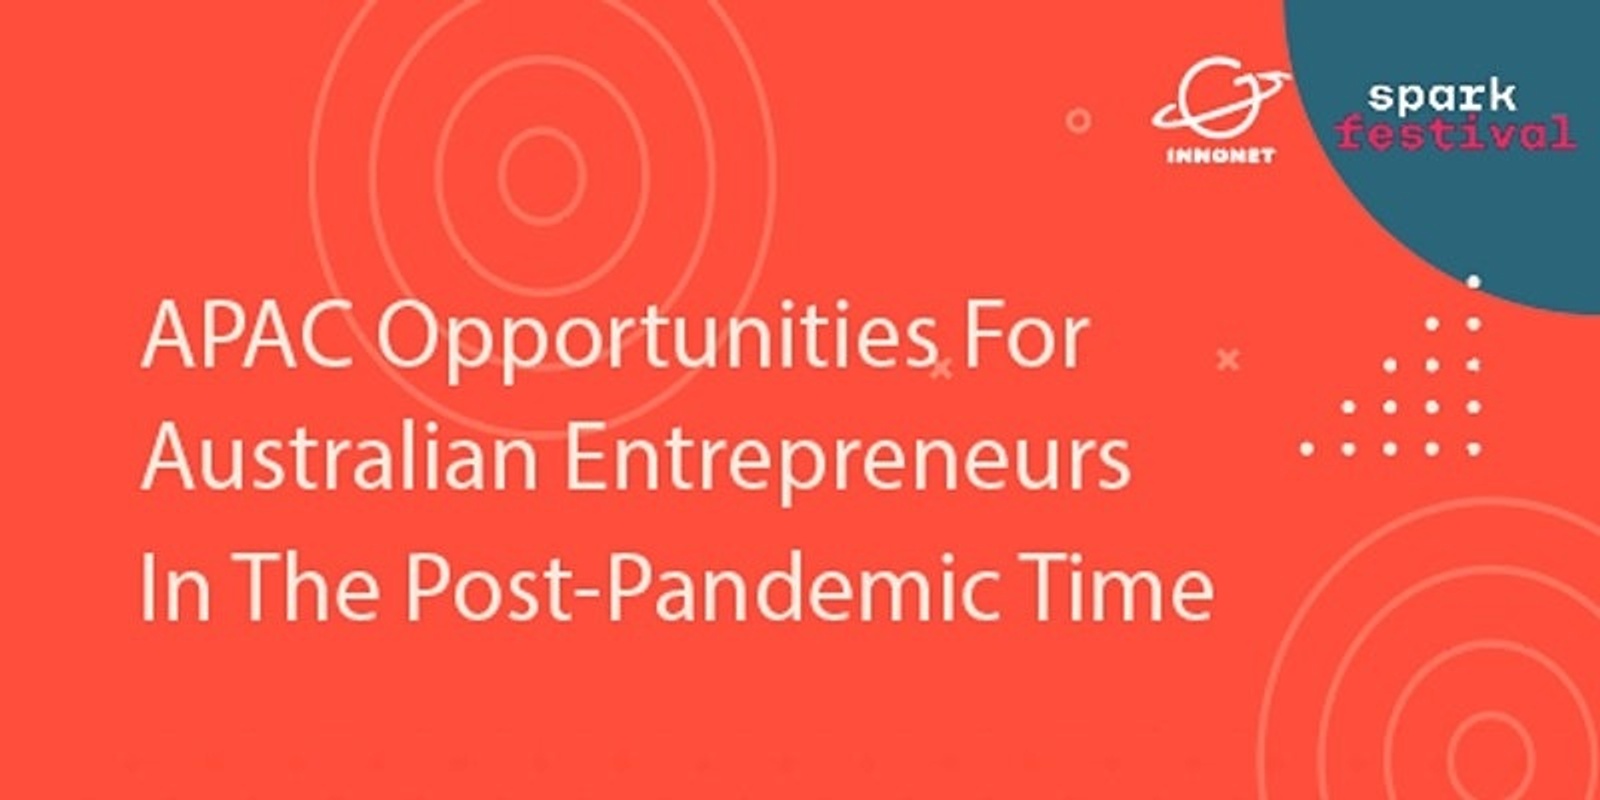 Banner image for China+APAC Opportunities for Aussie Entrepreneurs Post-Pandemic